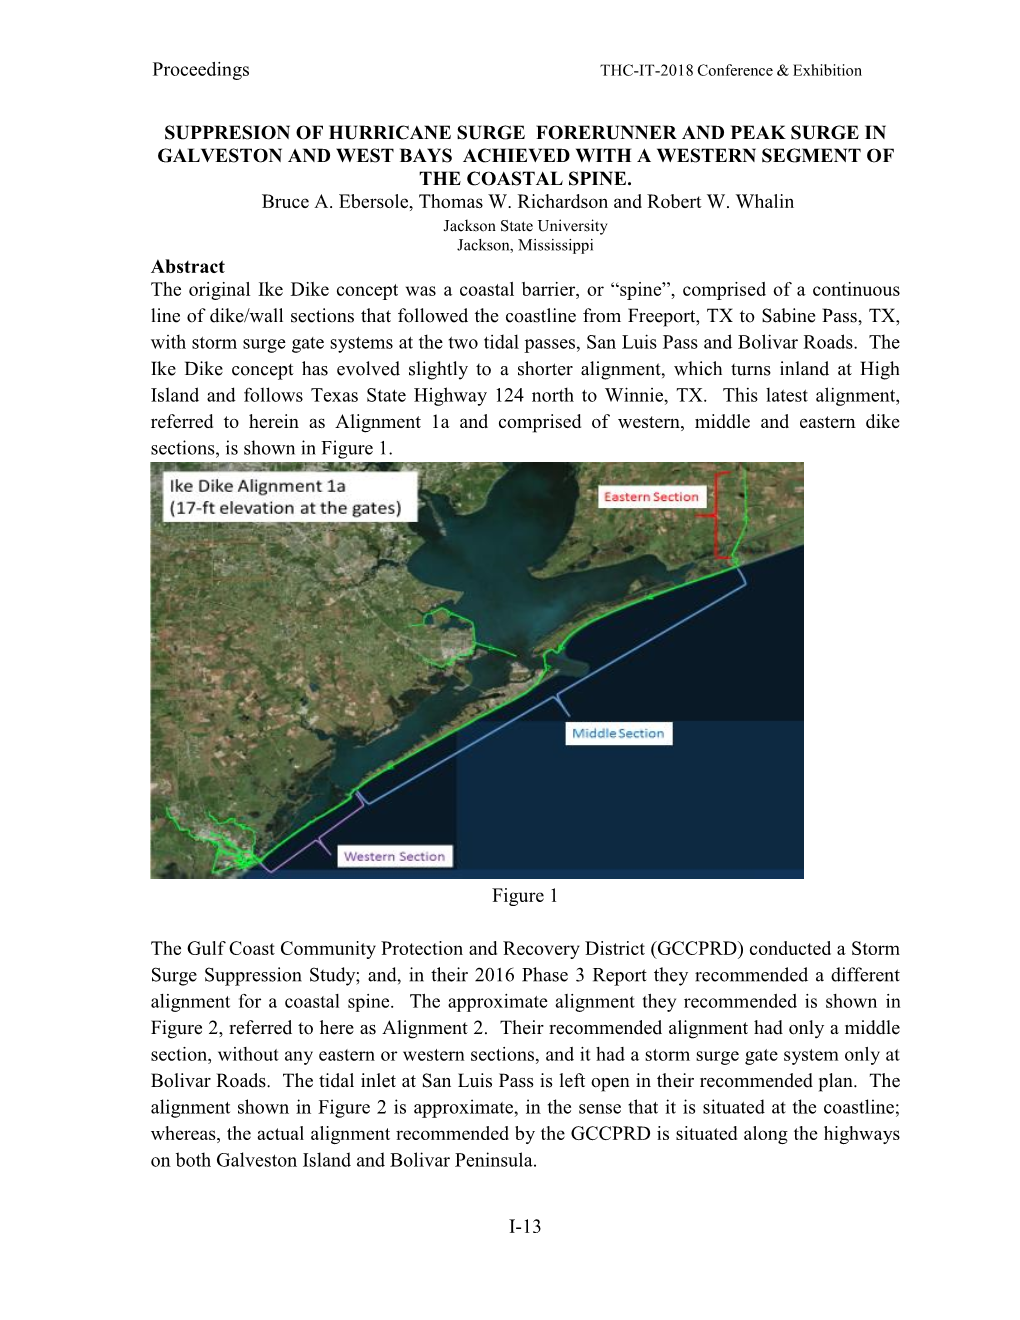 Suppresion of Hurricane Surge Forerunner and Peak Surge in Galveston and West Bay Achieved with A